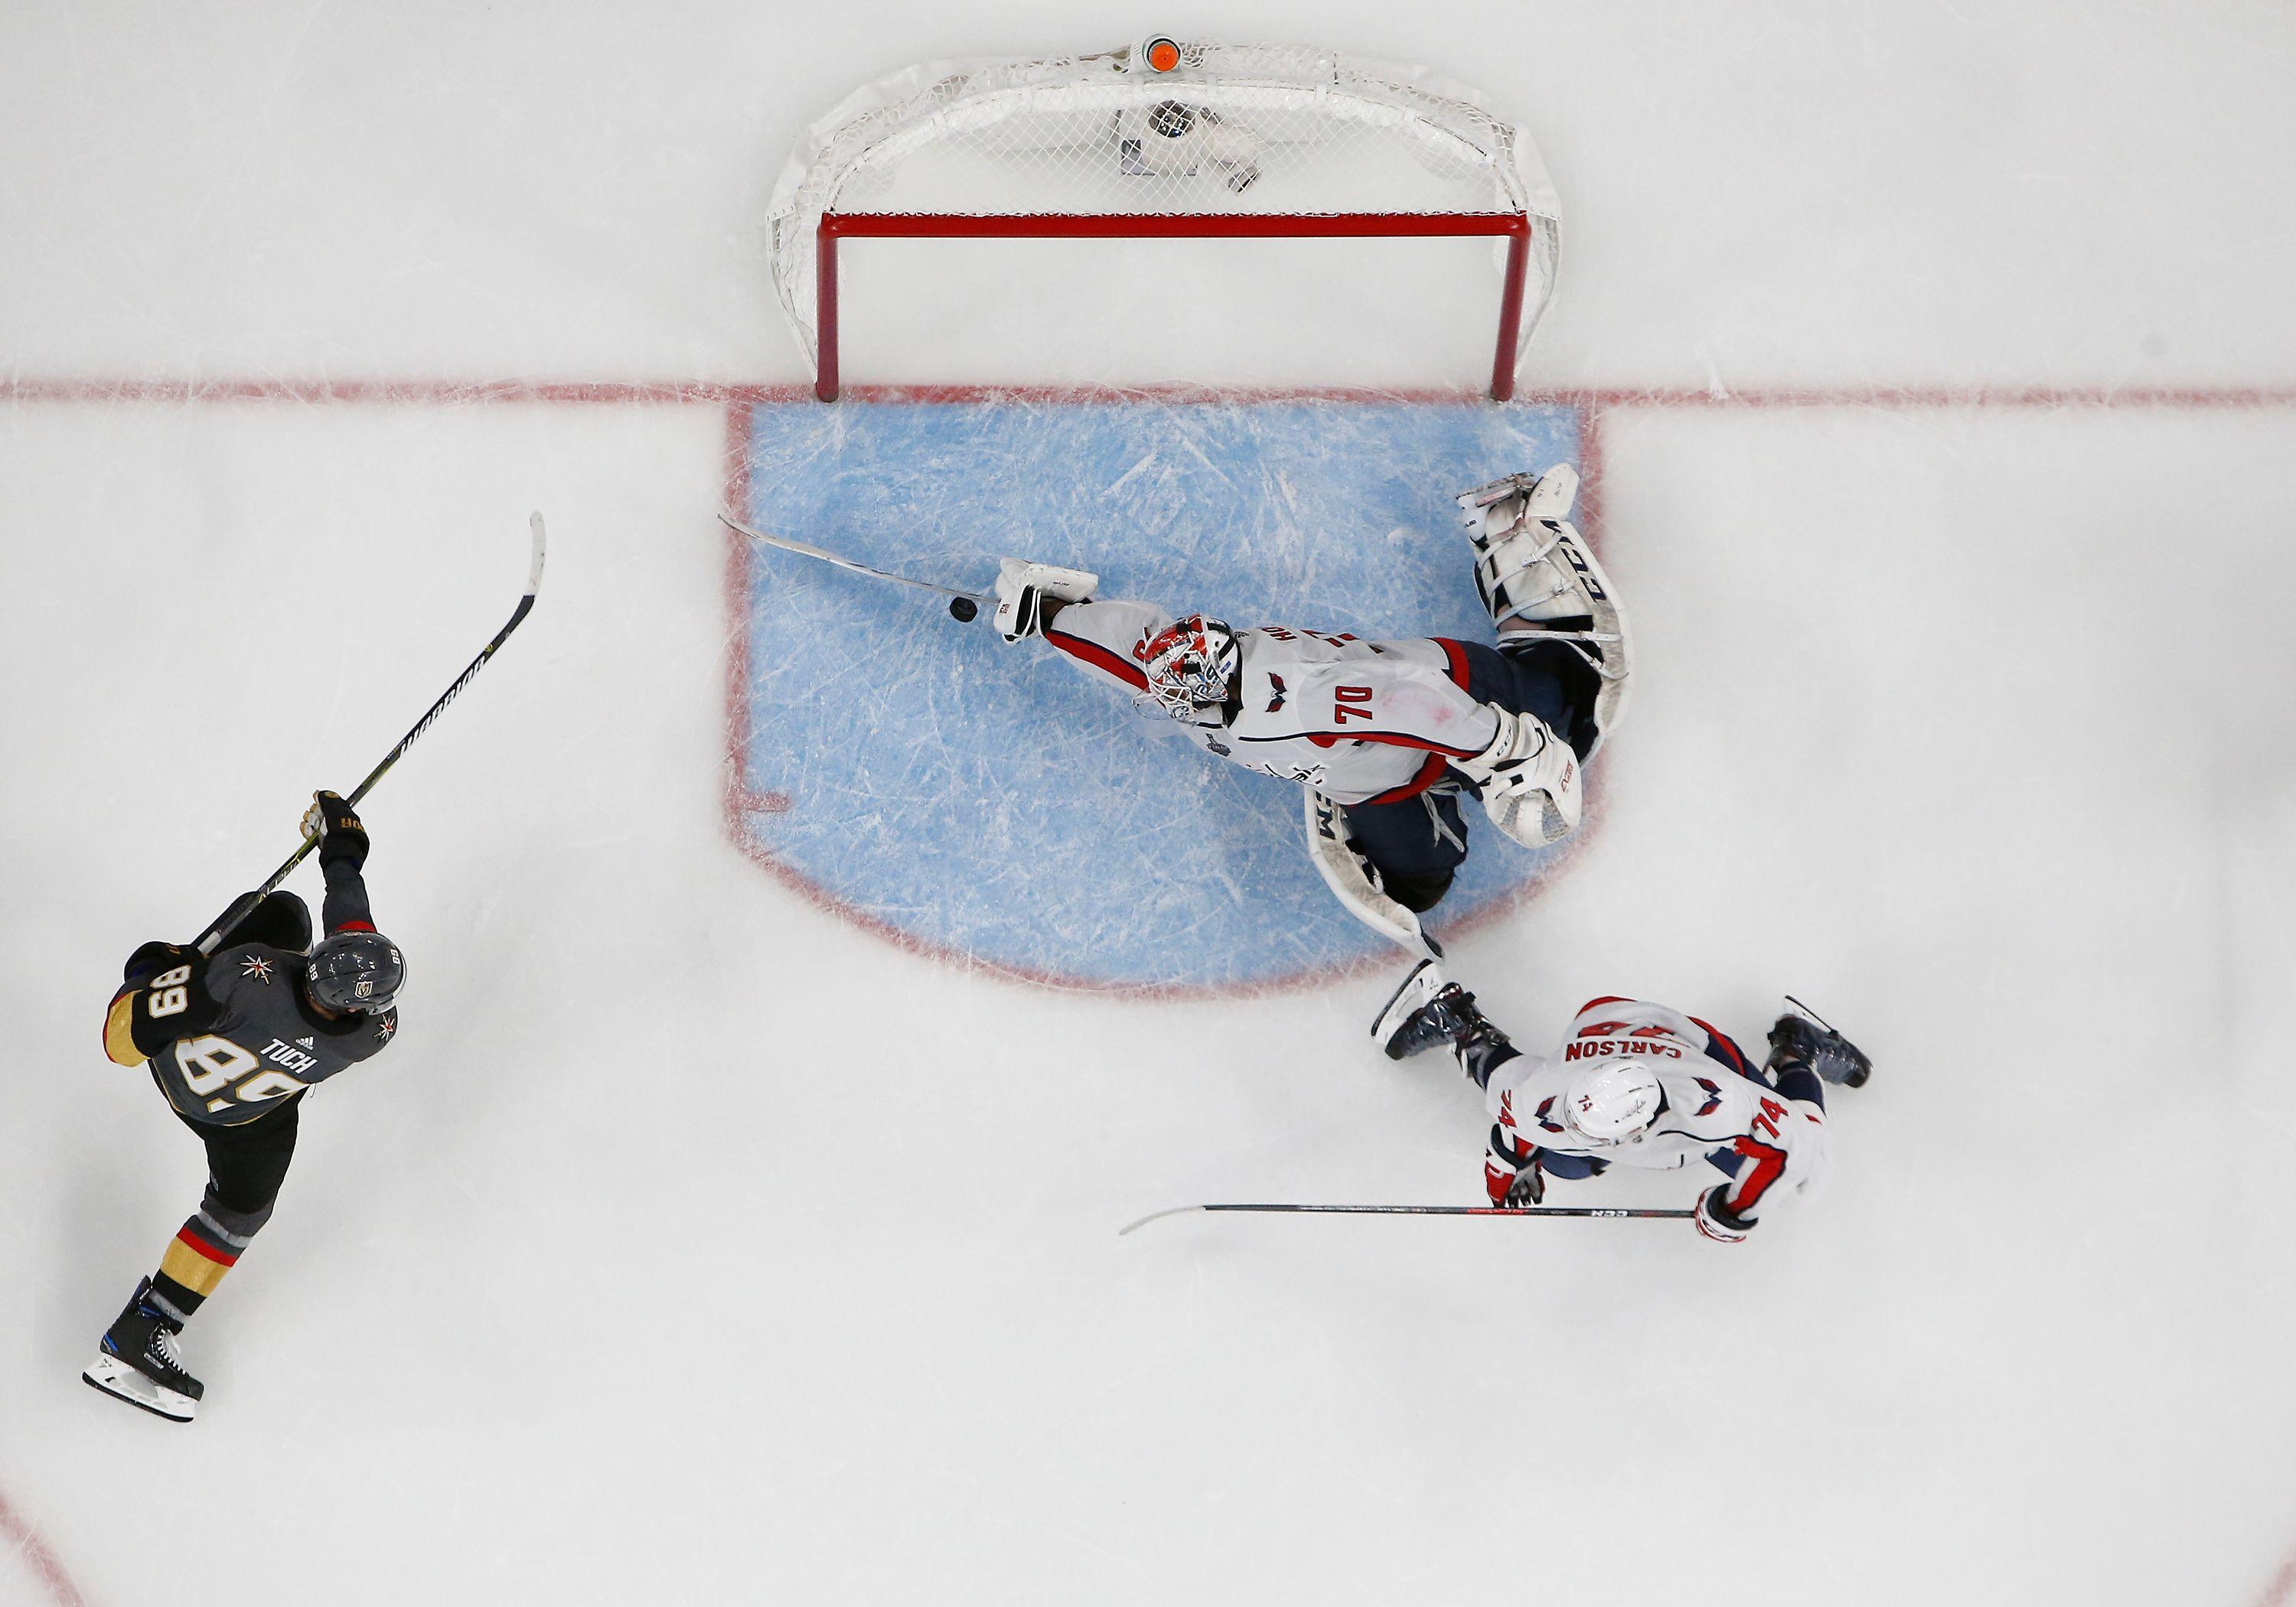 An NHL photographer captured an incredible image of Holtby's save